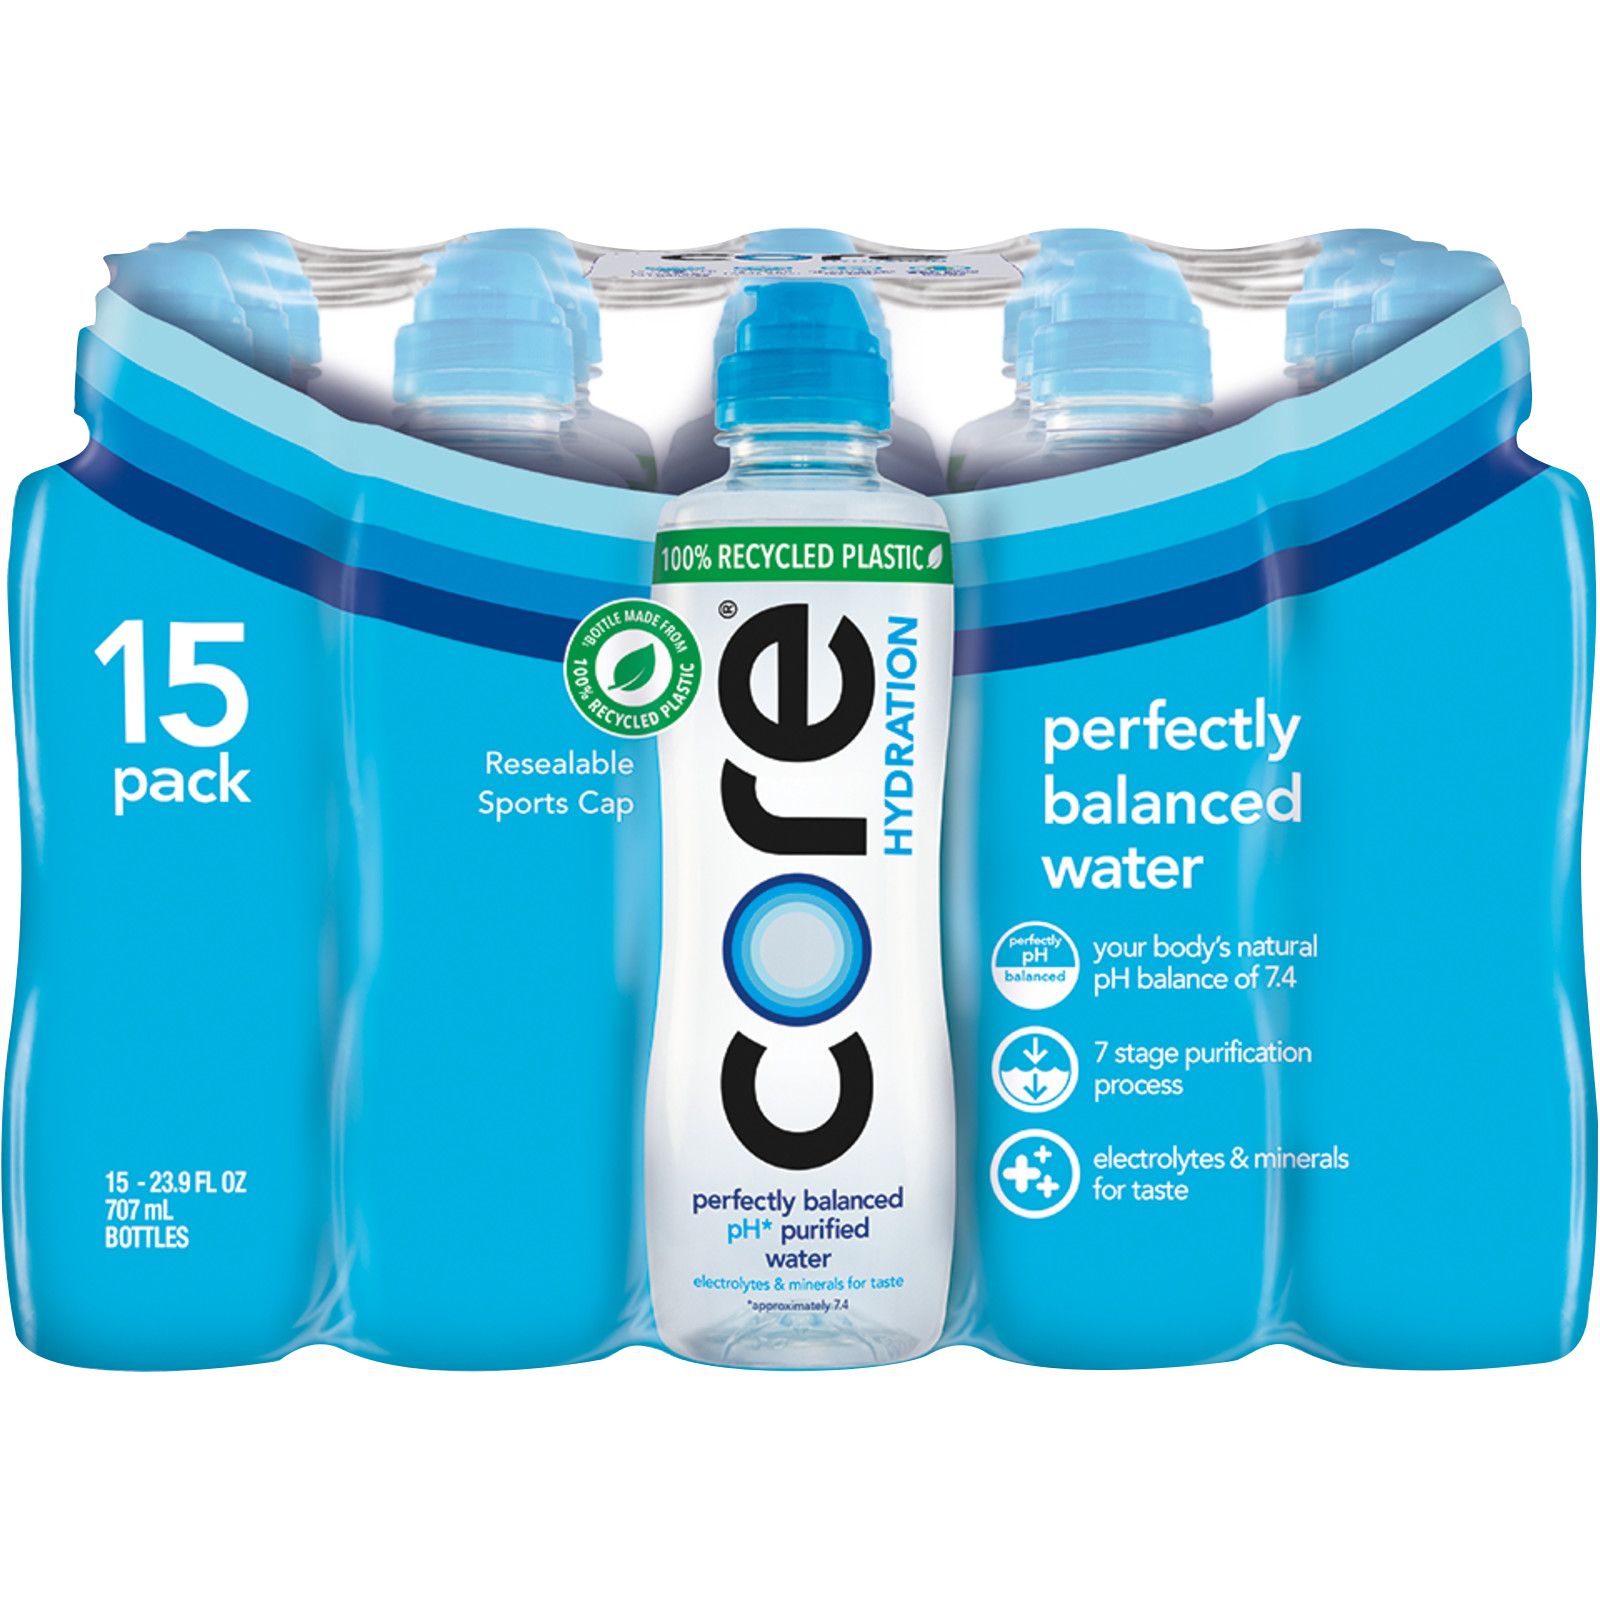 Core Hydration Perfect 7.4 PH Nutrient Enhanced Water, 16.9 Ounce